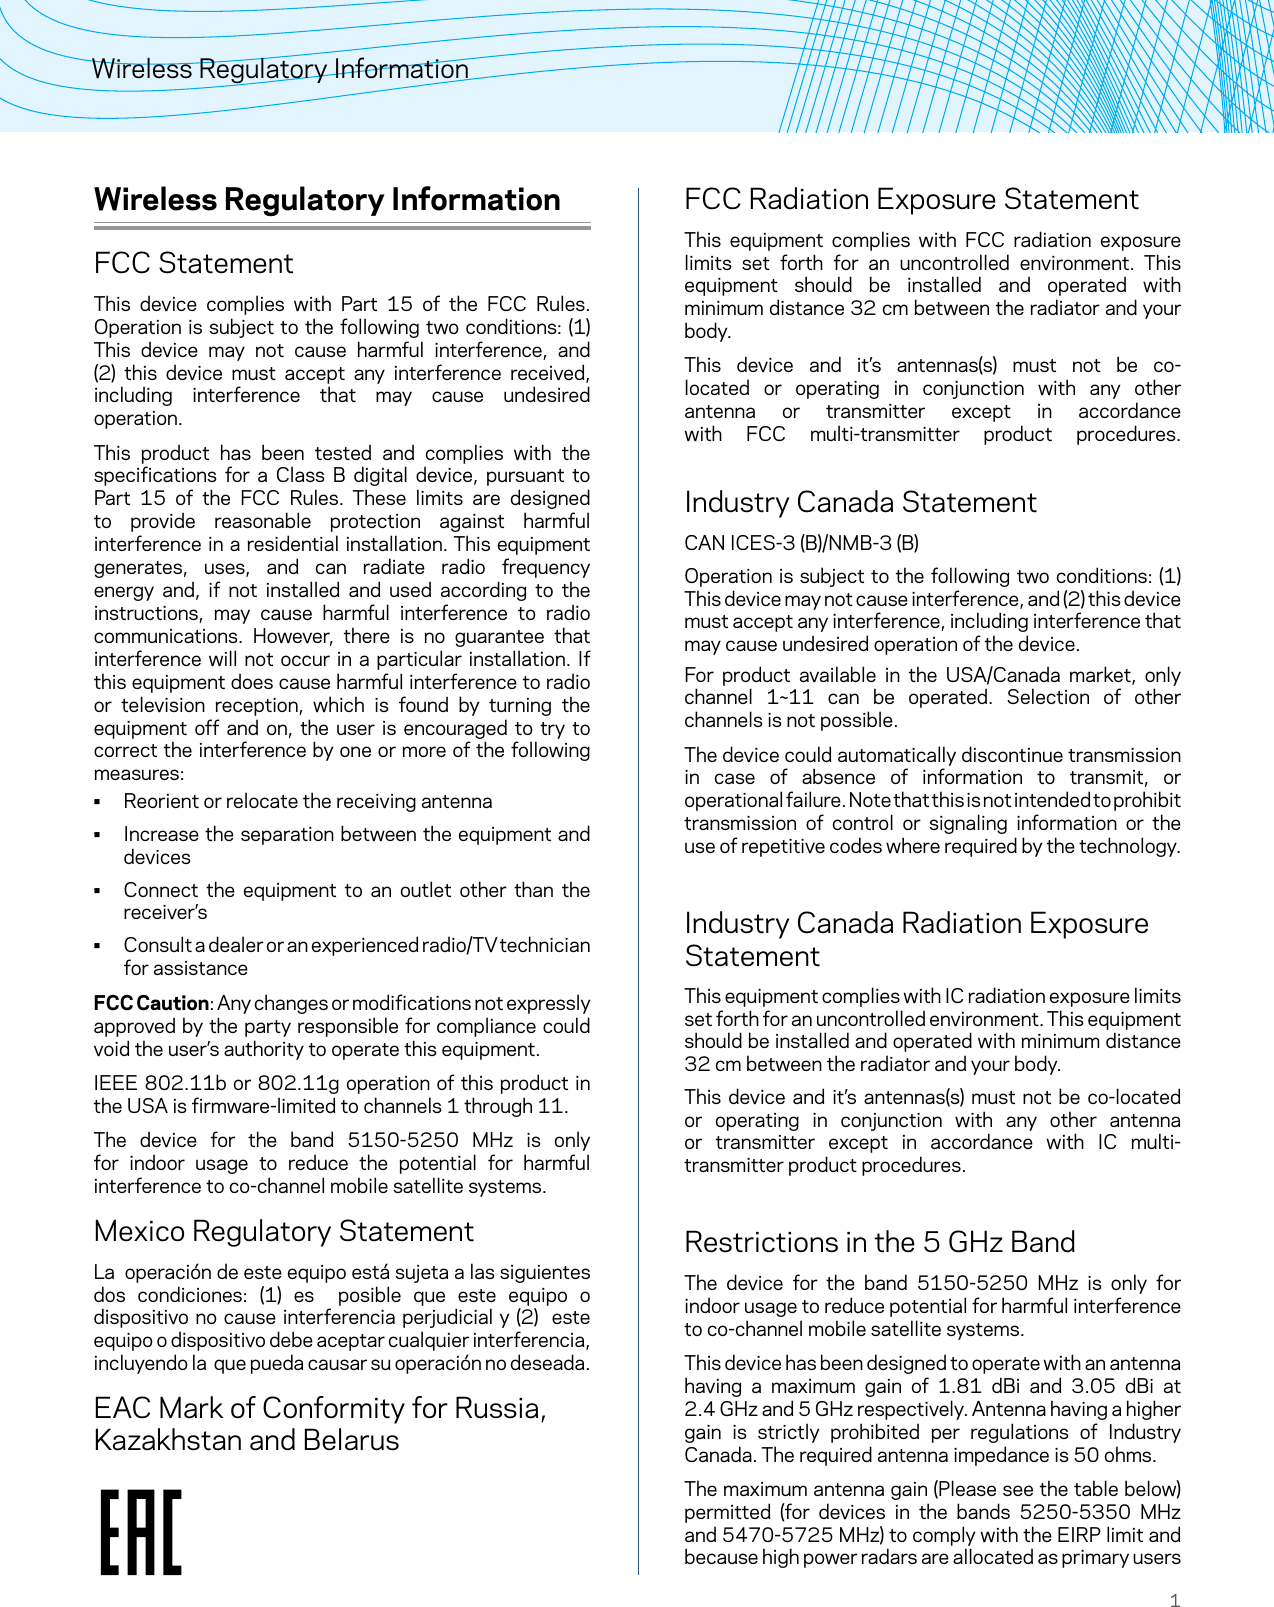 1Wireless Regulatory InformationWireless Regulatory InformationFCC StatementThis device complies with Part 15 of the FCC Rules. Operation is subject to the following two conditions: (1) This device may not cause harmful interference, and (2) this device must accept any interference received, including interference that may cause undesired operation.This product has been tested and complies with the specifications for a Class B digital device, pursuant to Part 15 of the FCC Rules. These limits are designed to provide reasonable protection against harmful interference in a residential installation. This equipment generates, uses, and can radiate radio frequency energy and, if not installed and used according to the instructions, may cause harmful interference to radio communications. However, there is no guarantee that interference will not occur in a particular installation. If this equipment does cause harmful interference to radio or television reception, which is found by turning the equipment off and on, the user is encouraged to try to correct the interference by one or more of the following measures: • Reorient or relocate the receiving antenna • Increase the separation between the equipment and devices • Connect the equipment to an outlet other than the receiver’s • Consult a dealer or an experienced radio/TV technician for assistanceFCC Caution: Any changes or modifications not expressly approved by the party responsible for compliance could void the user’s authority to operate this equipment.IEEE 802.11b or 802.11g operation of this product in the USA is firmware-limited to channels 1 through 11.The device for the band 5150-5250 MHz is only for indoor usage to reduce the potential for harmful interference to co-channel mobile satellite systems.Mexico Regulatory StatementLa  operación de este equipo está sujeta a las siguientes dos condiciones: (1) es  posible que este equipo o dispositivo no cause interferencia perjudicial y (2)  este equipo o dispositivo debe aceptar cualquier interferencia, incluyendo la  que pueda causar su operación no deseada.EAC Mark of Conformity for Russia, Kazakhstan and BelarusFCC Radiation Exposure StatementThis equipment complies with FCC radiation exposure limits set forth for an uncontrolled environment. This equipment should be installed and operated with minimum distance 32 cm between the radiator and your body.This device and it’s antennas(s) must not be co-located or operating in conjunction with any other antenna or transmitter except in accordance with FCC multi-transmitter product procedures.  Industry Canada StatementCAN ICES-3 (B)/NMB-3 (B)Operation is subject to the following two conditions: (1) This device may not cause interference, and (2) this device must accept any interference, including interference that may cause undesired operation of the device.For product available in the USA/Canada market, only channel 1~11 can be operated. Selection of other channels is not possible.The device could automatically discontinue transmission in case of absence of information to transmit, or operational failure. Note that this is not intended to prohibit transmission of control or signaling information or the use of repetitive codes where required by the technology. Industry Canada Radiation Exposure StatementThis equipment complies with IC radiation exposure limits set forth for an uncontrolled environment. This equipment should be installed and operated with minimum distance 32 cm between the radiator and your body.This device and it’s antennas(s) must not be co-located or operating in conjunction with any other antenna or transmitter except in accordance with IC multi-transmitter product procedures. Restrictions in the 5 GHz BandThe device for the band 5150-5250 MHz is only for indoor usage to reduce potential for harmful interference to co-channel mobile satellite systems.This device has been designed to operate with an antenna having a maximum gain of 1.81 dBi and 3.05 dBi at  2.4 GHz and 5 GHz respectively. Antenna having a higher gain is strictly prohibited per regulations of Industry Canada. The required antenna impedance is 50 ohms.The maximum antenna gain (Please see the table below) permitted (for devices in the bands 5250-5350 MHz and 5470-5725 MHz) to comply with the EIRP limit and because high power radars are allocated as primary users 